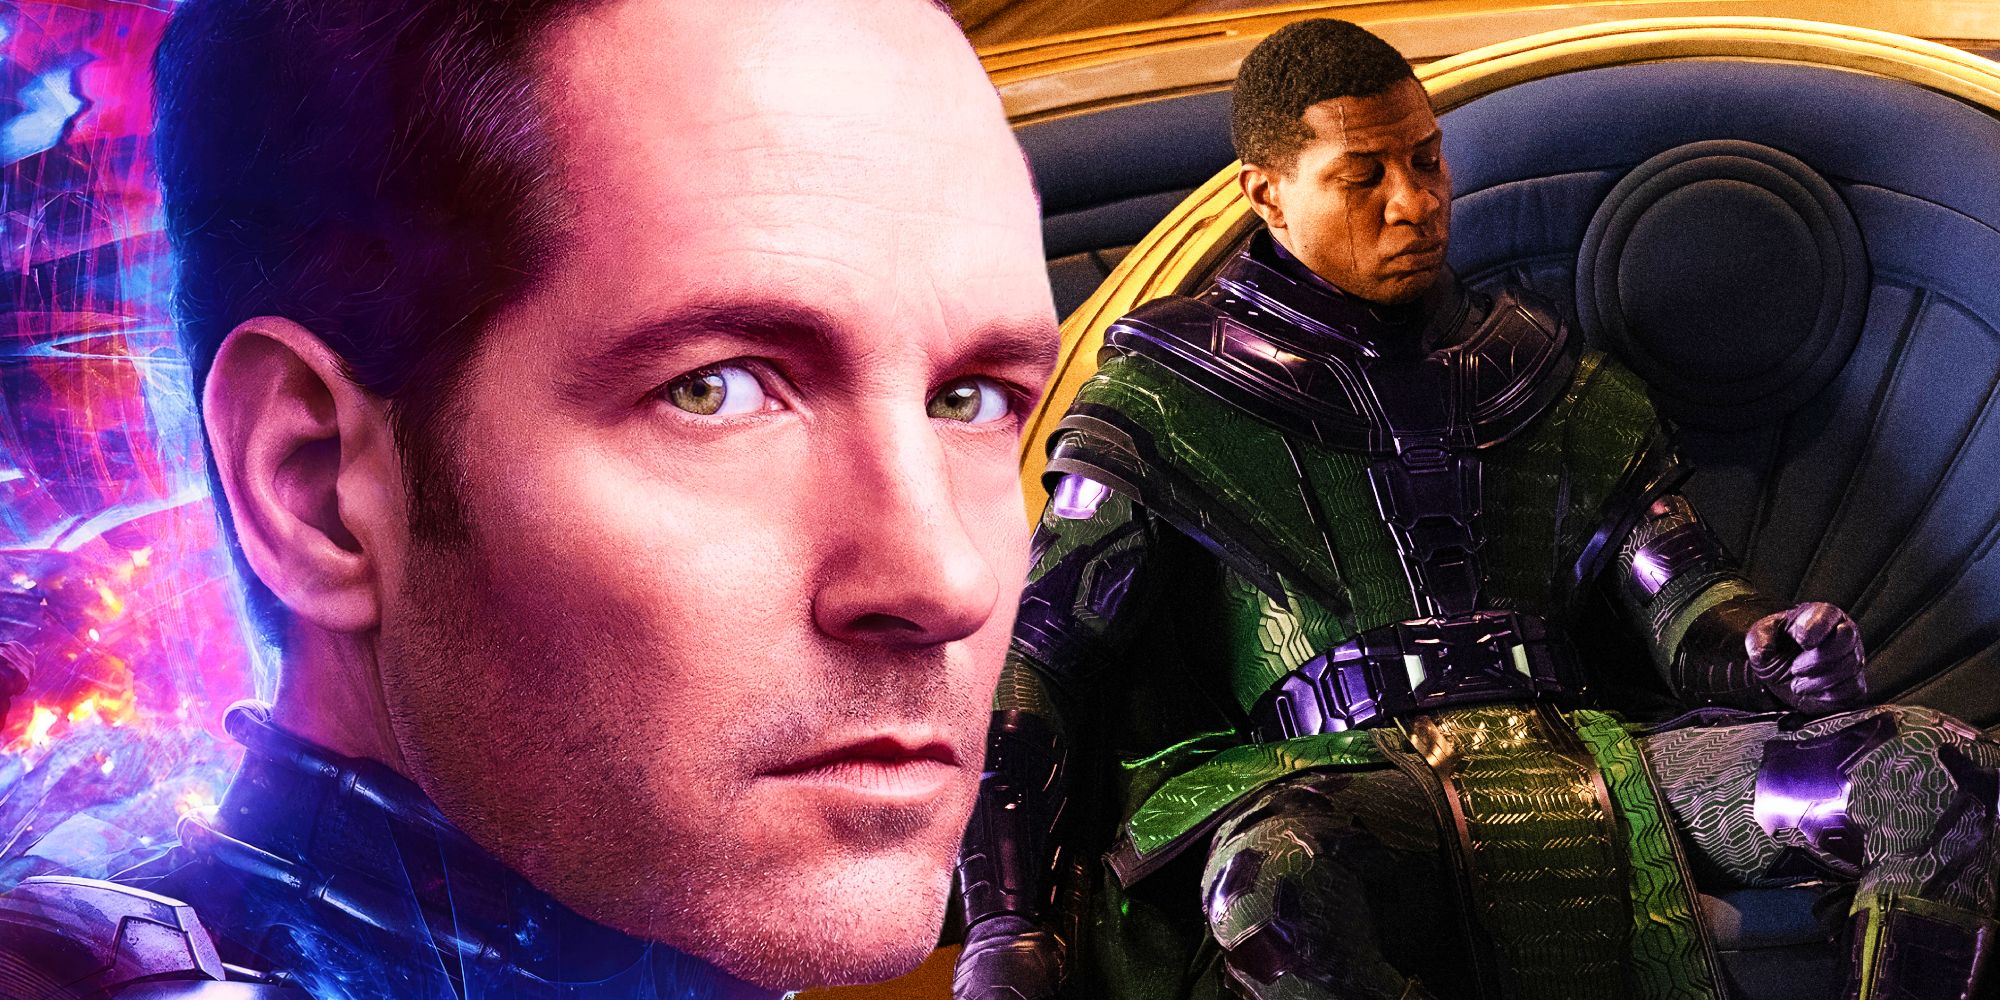 Paul Rudd as Scott Lang and Jonathan Majors as Kang the Conqueror in Ant-Man and the Wasp Quantumania